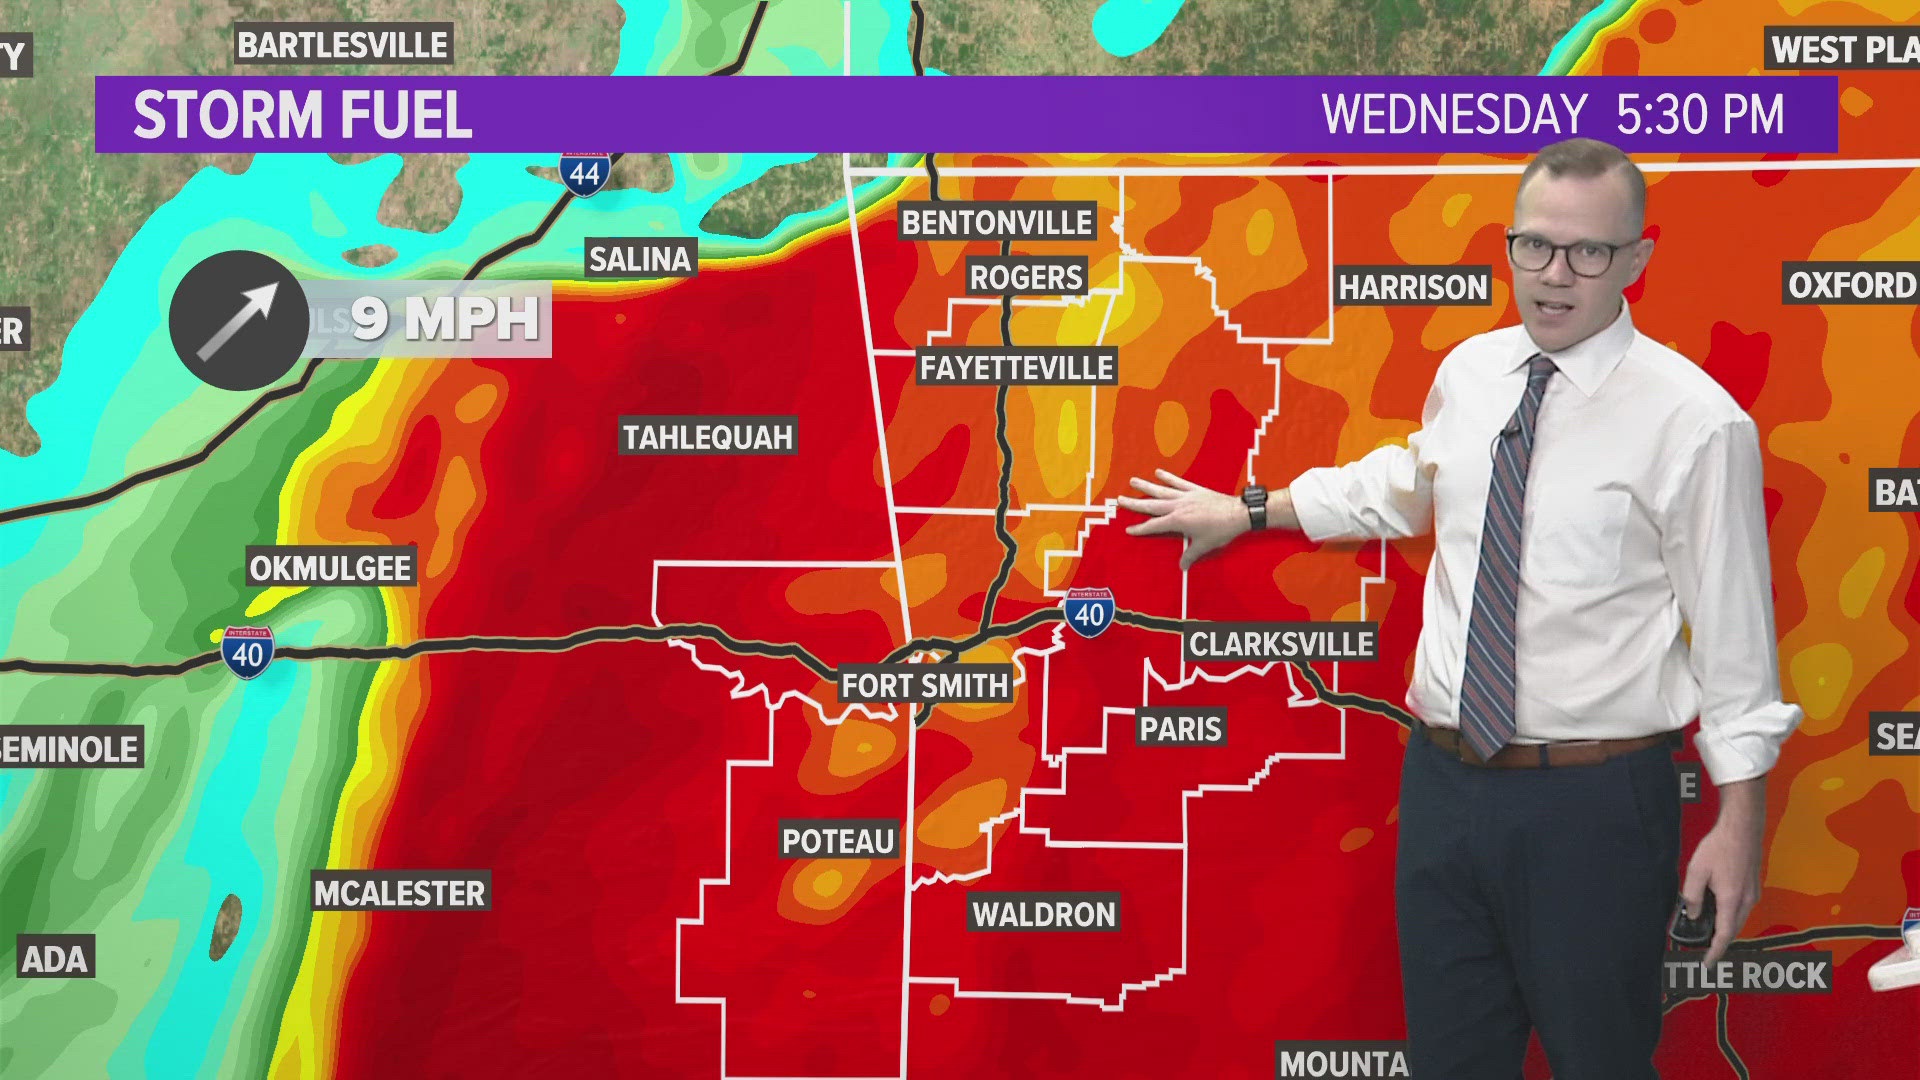 5NEWS Chief Meteorologist Skot Covert is live in studio covering what you need to know ahead of tonight's storms.